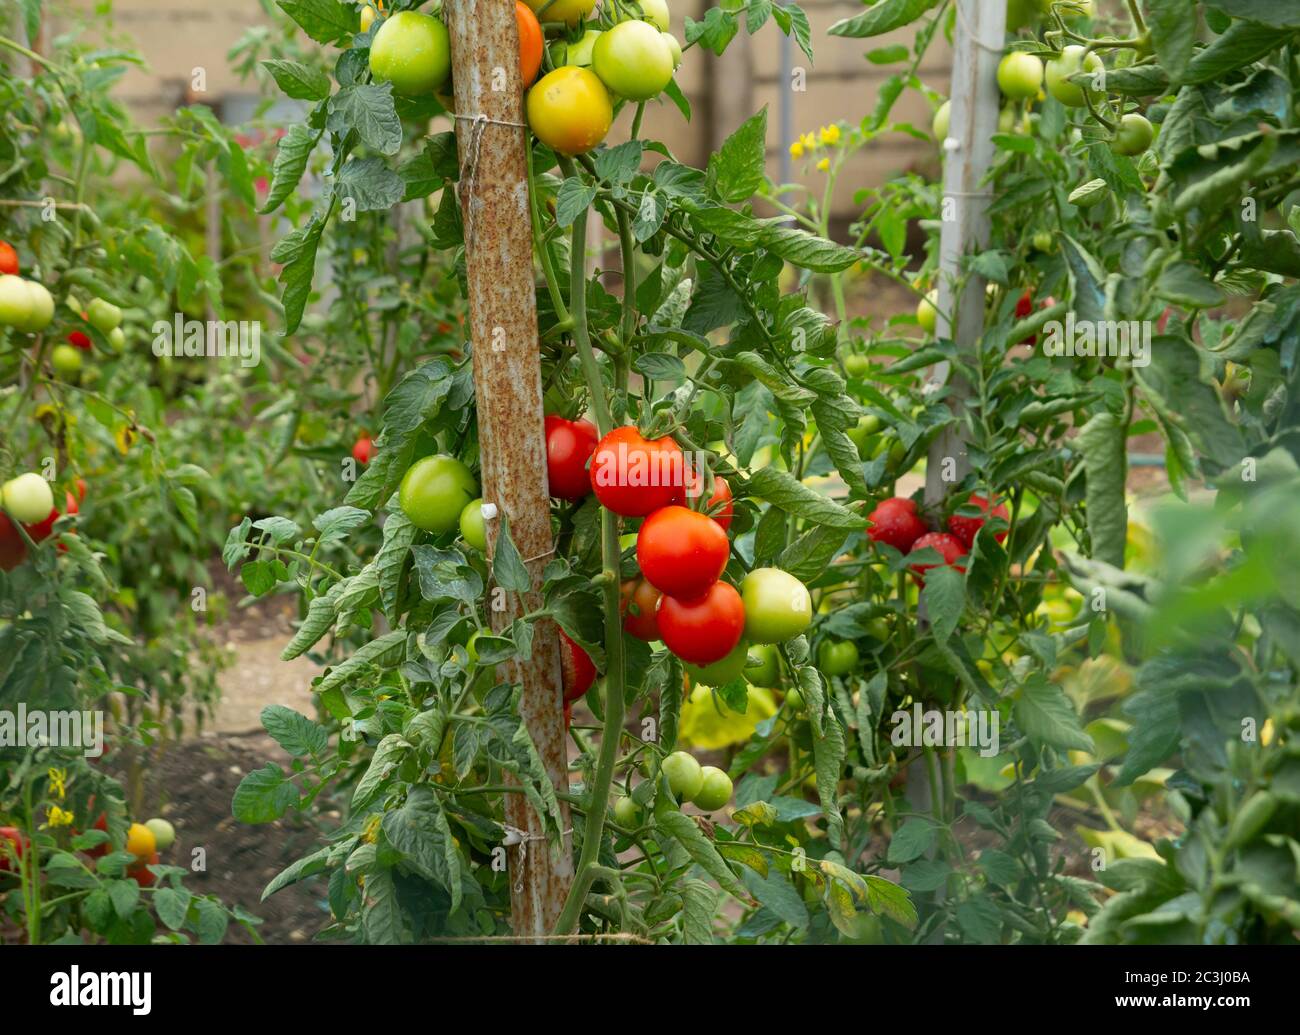 Homegrown tomatoes growing in garden Banque D'Images